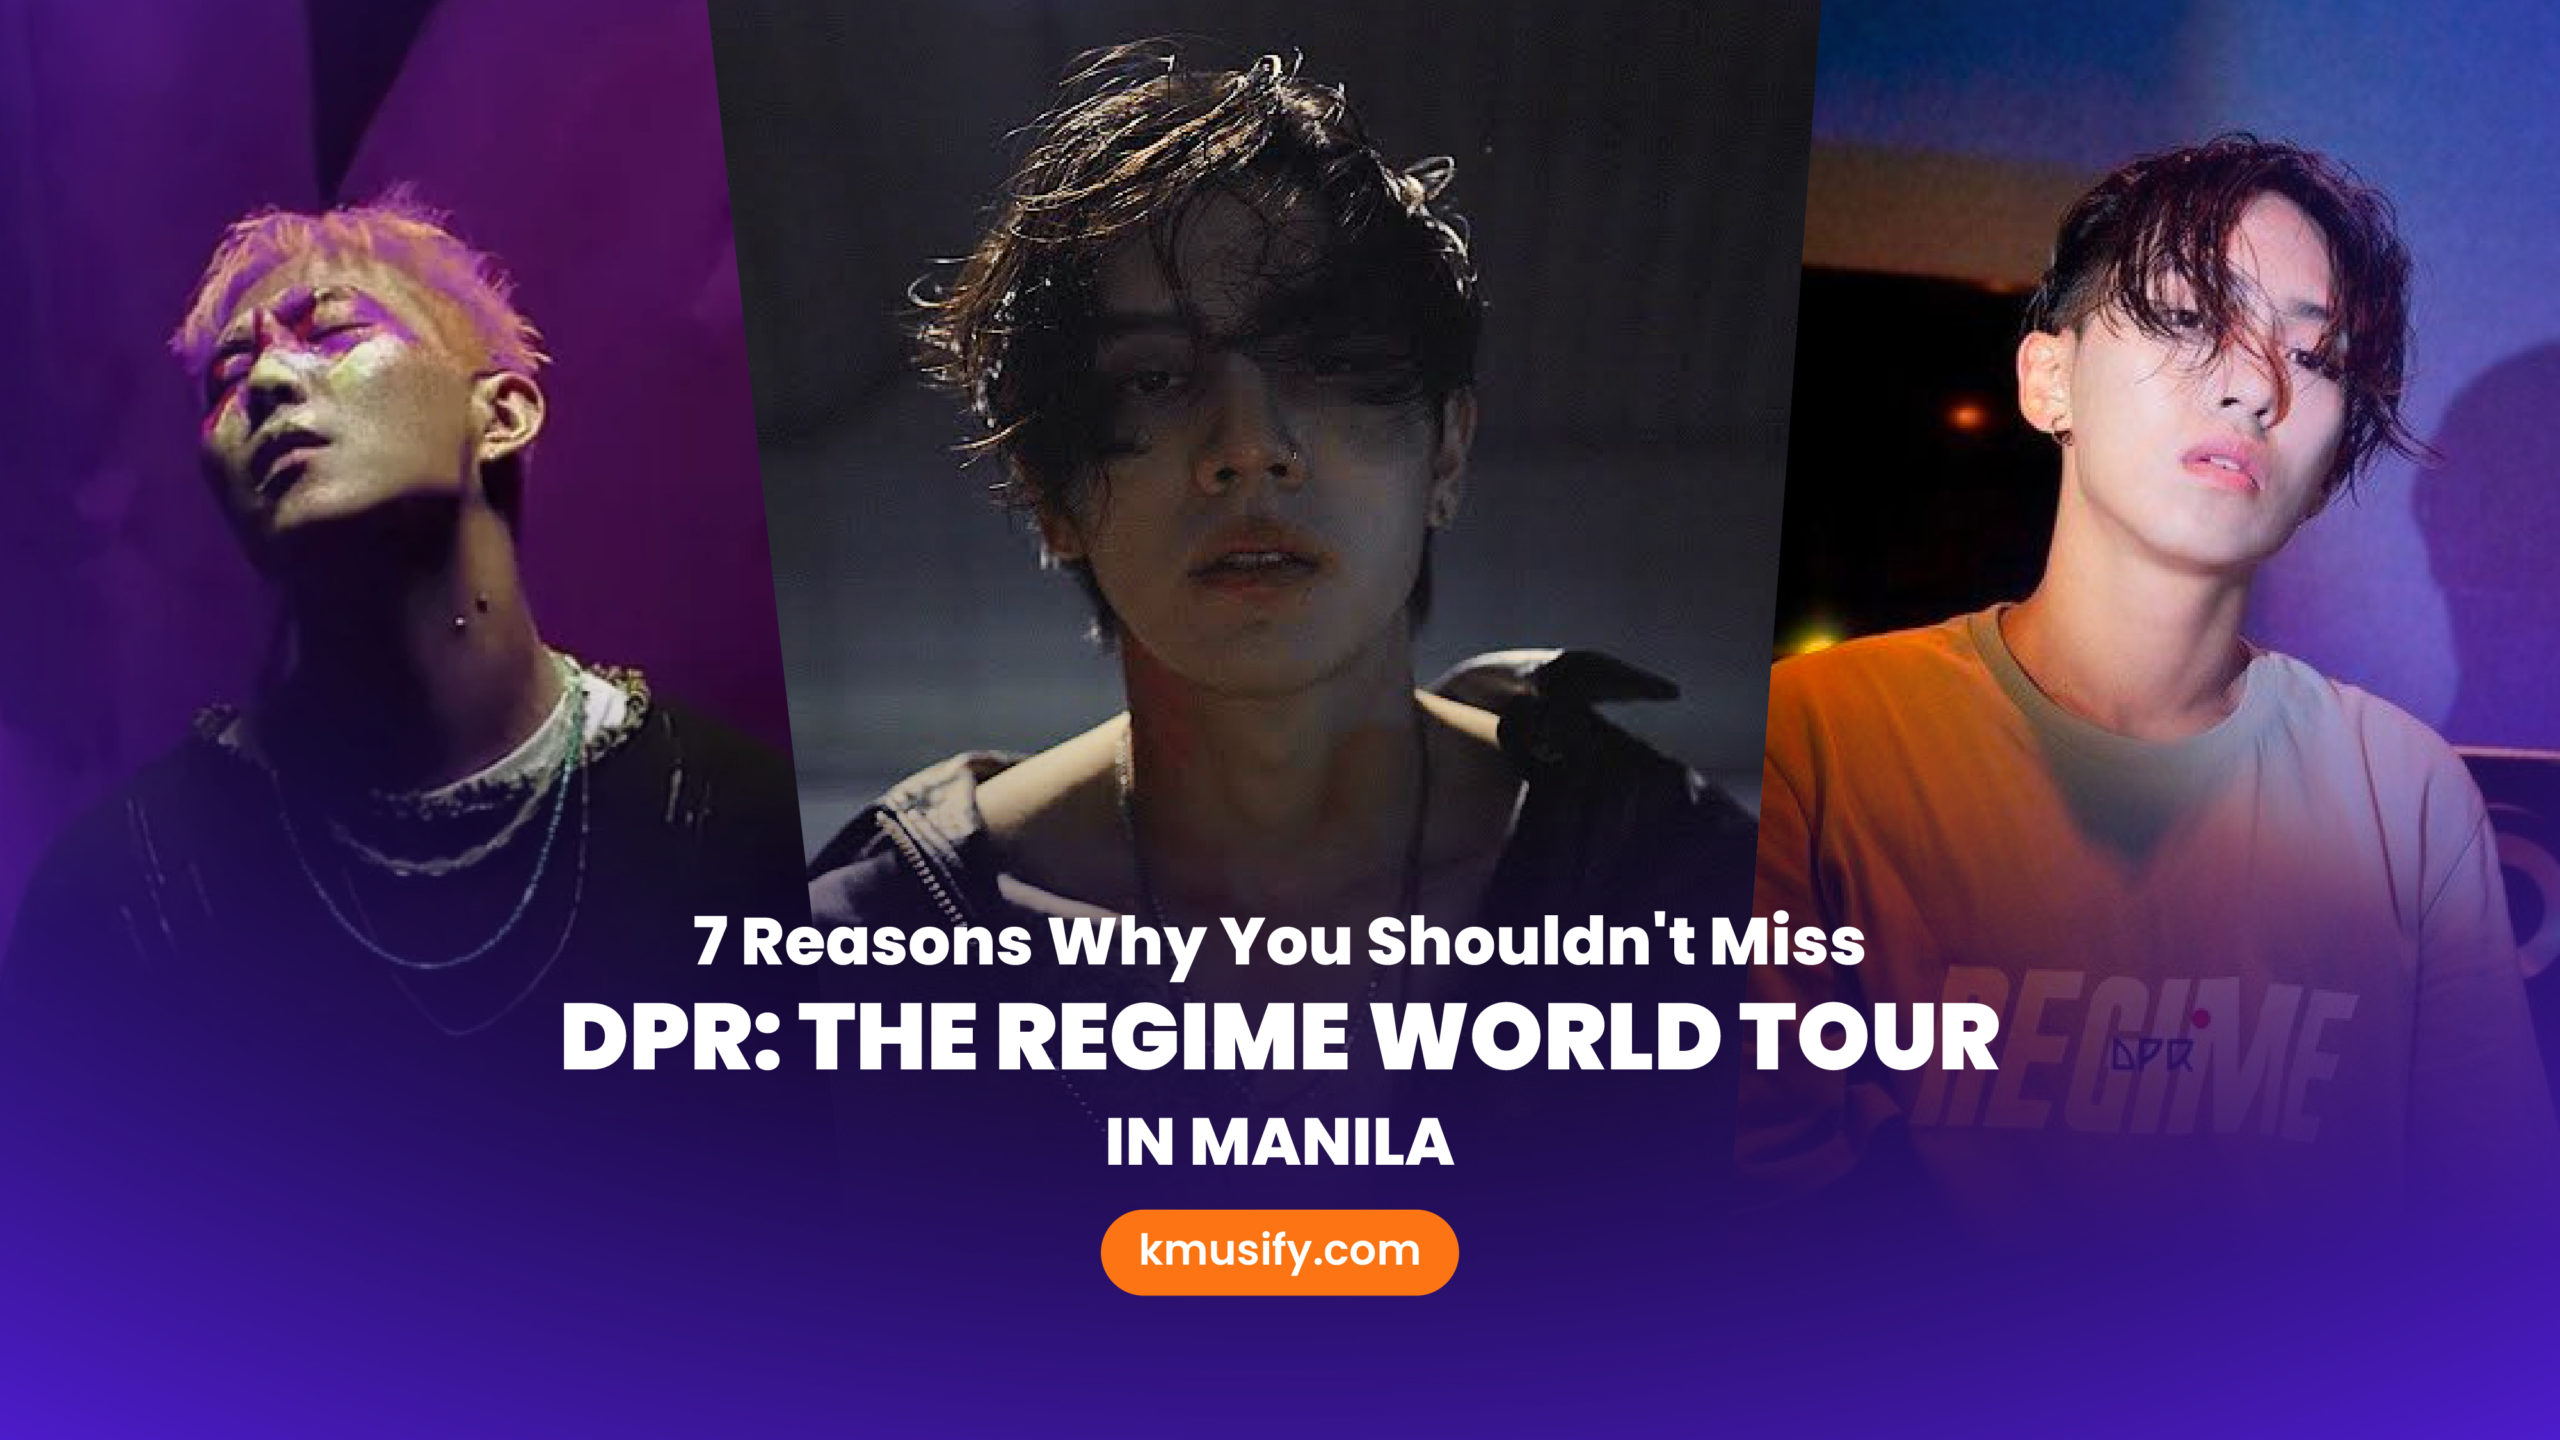 7 Reasons Why You Shouldn't Miss DPR THE REGIME WORLD TOUR IN MANILA